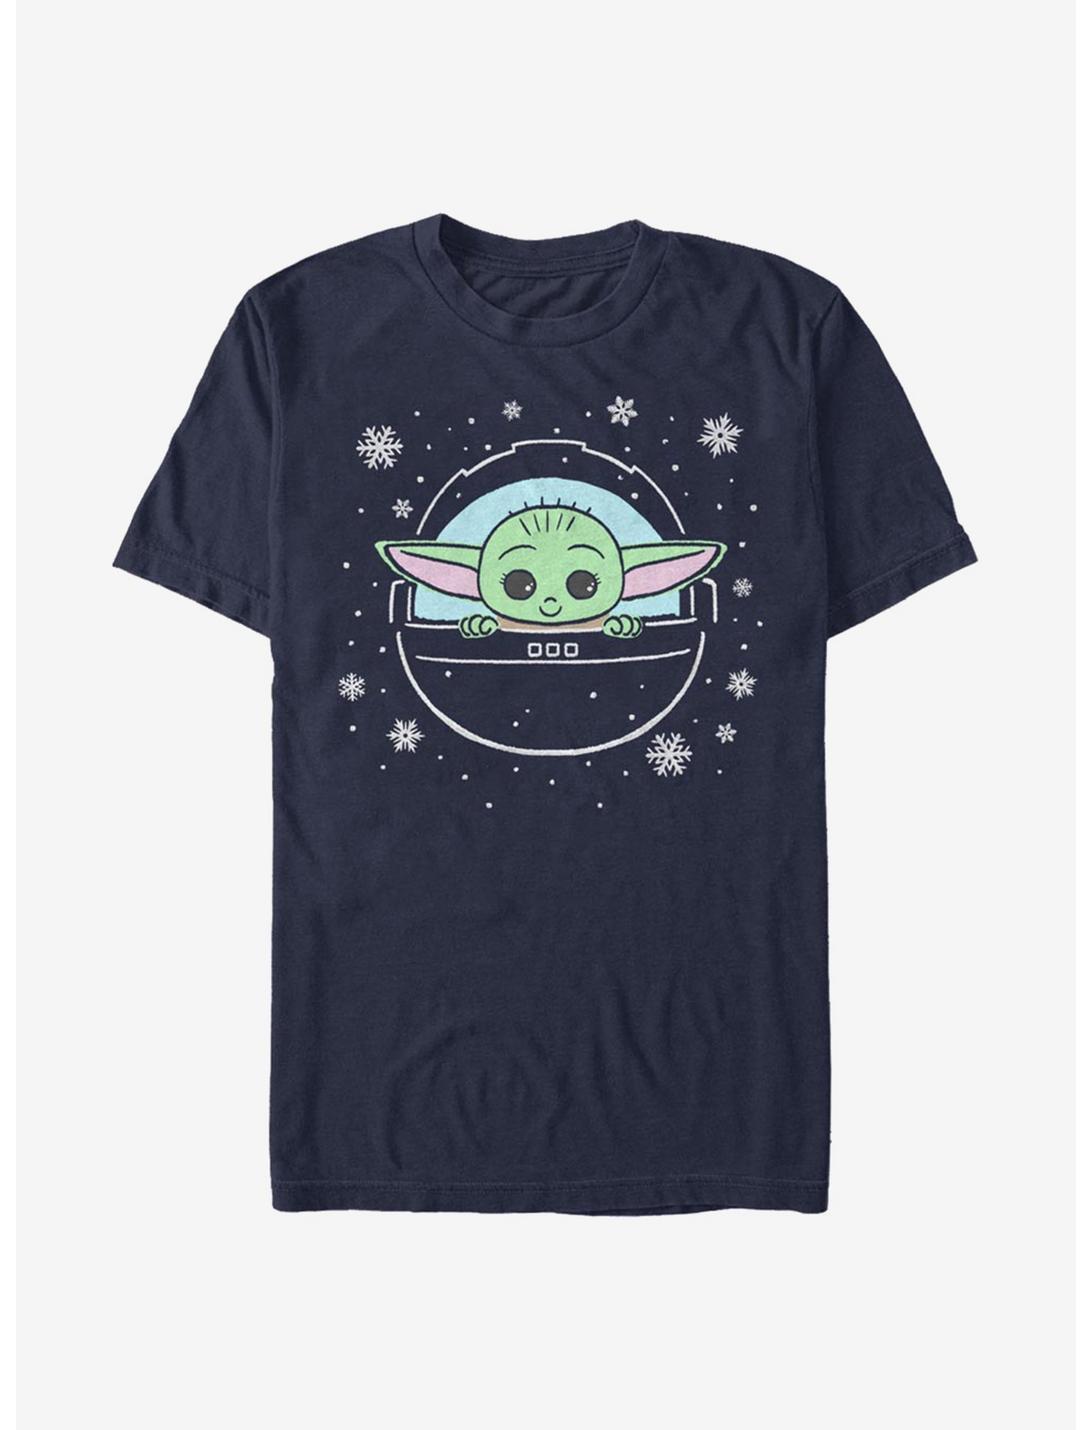 Star Wars The Mandalorian The Child Loves The Snow T-Shirt, NAVY, hi-res